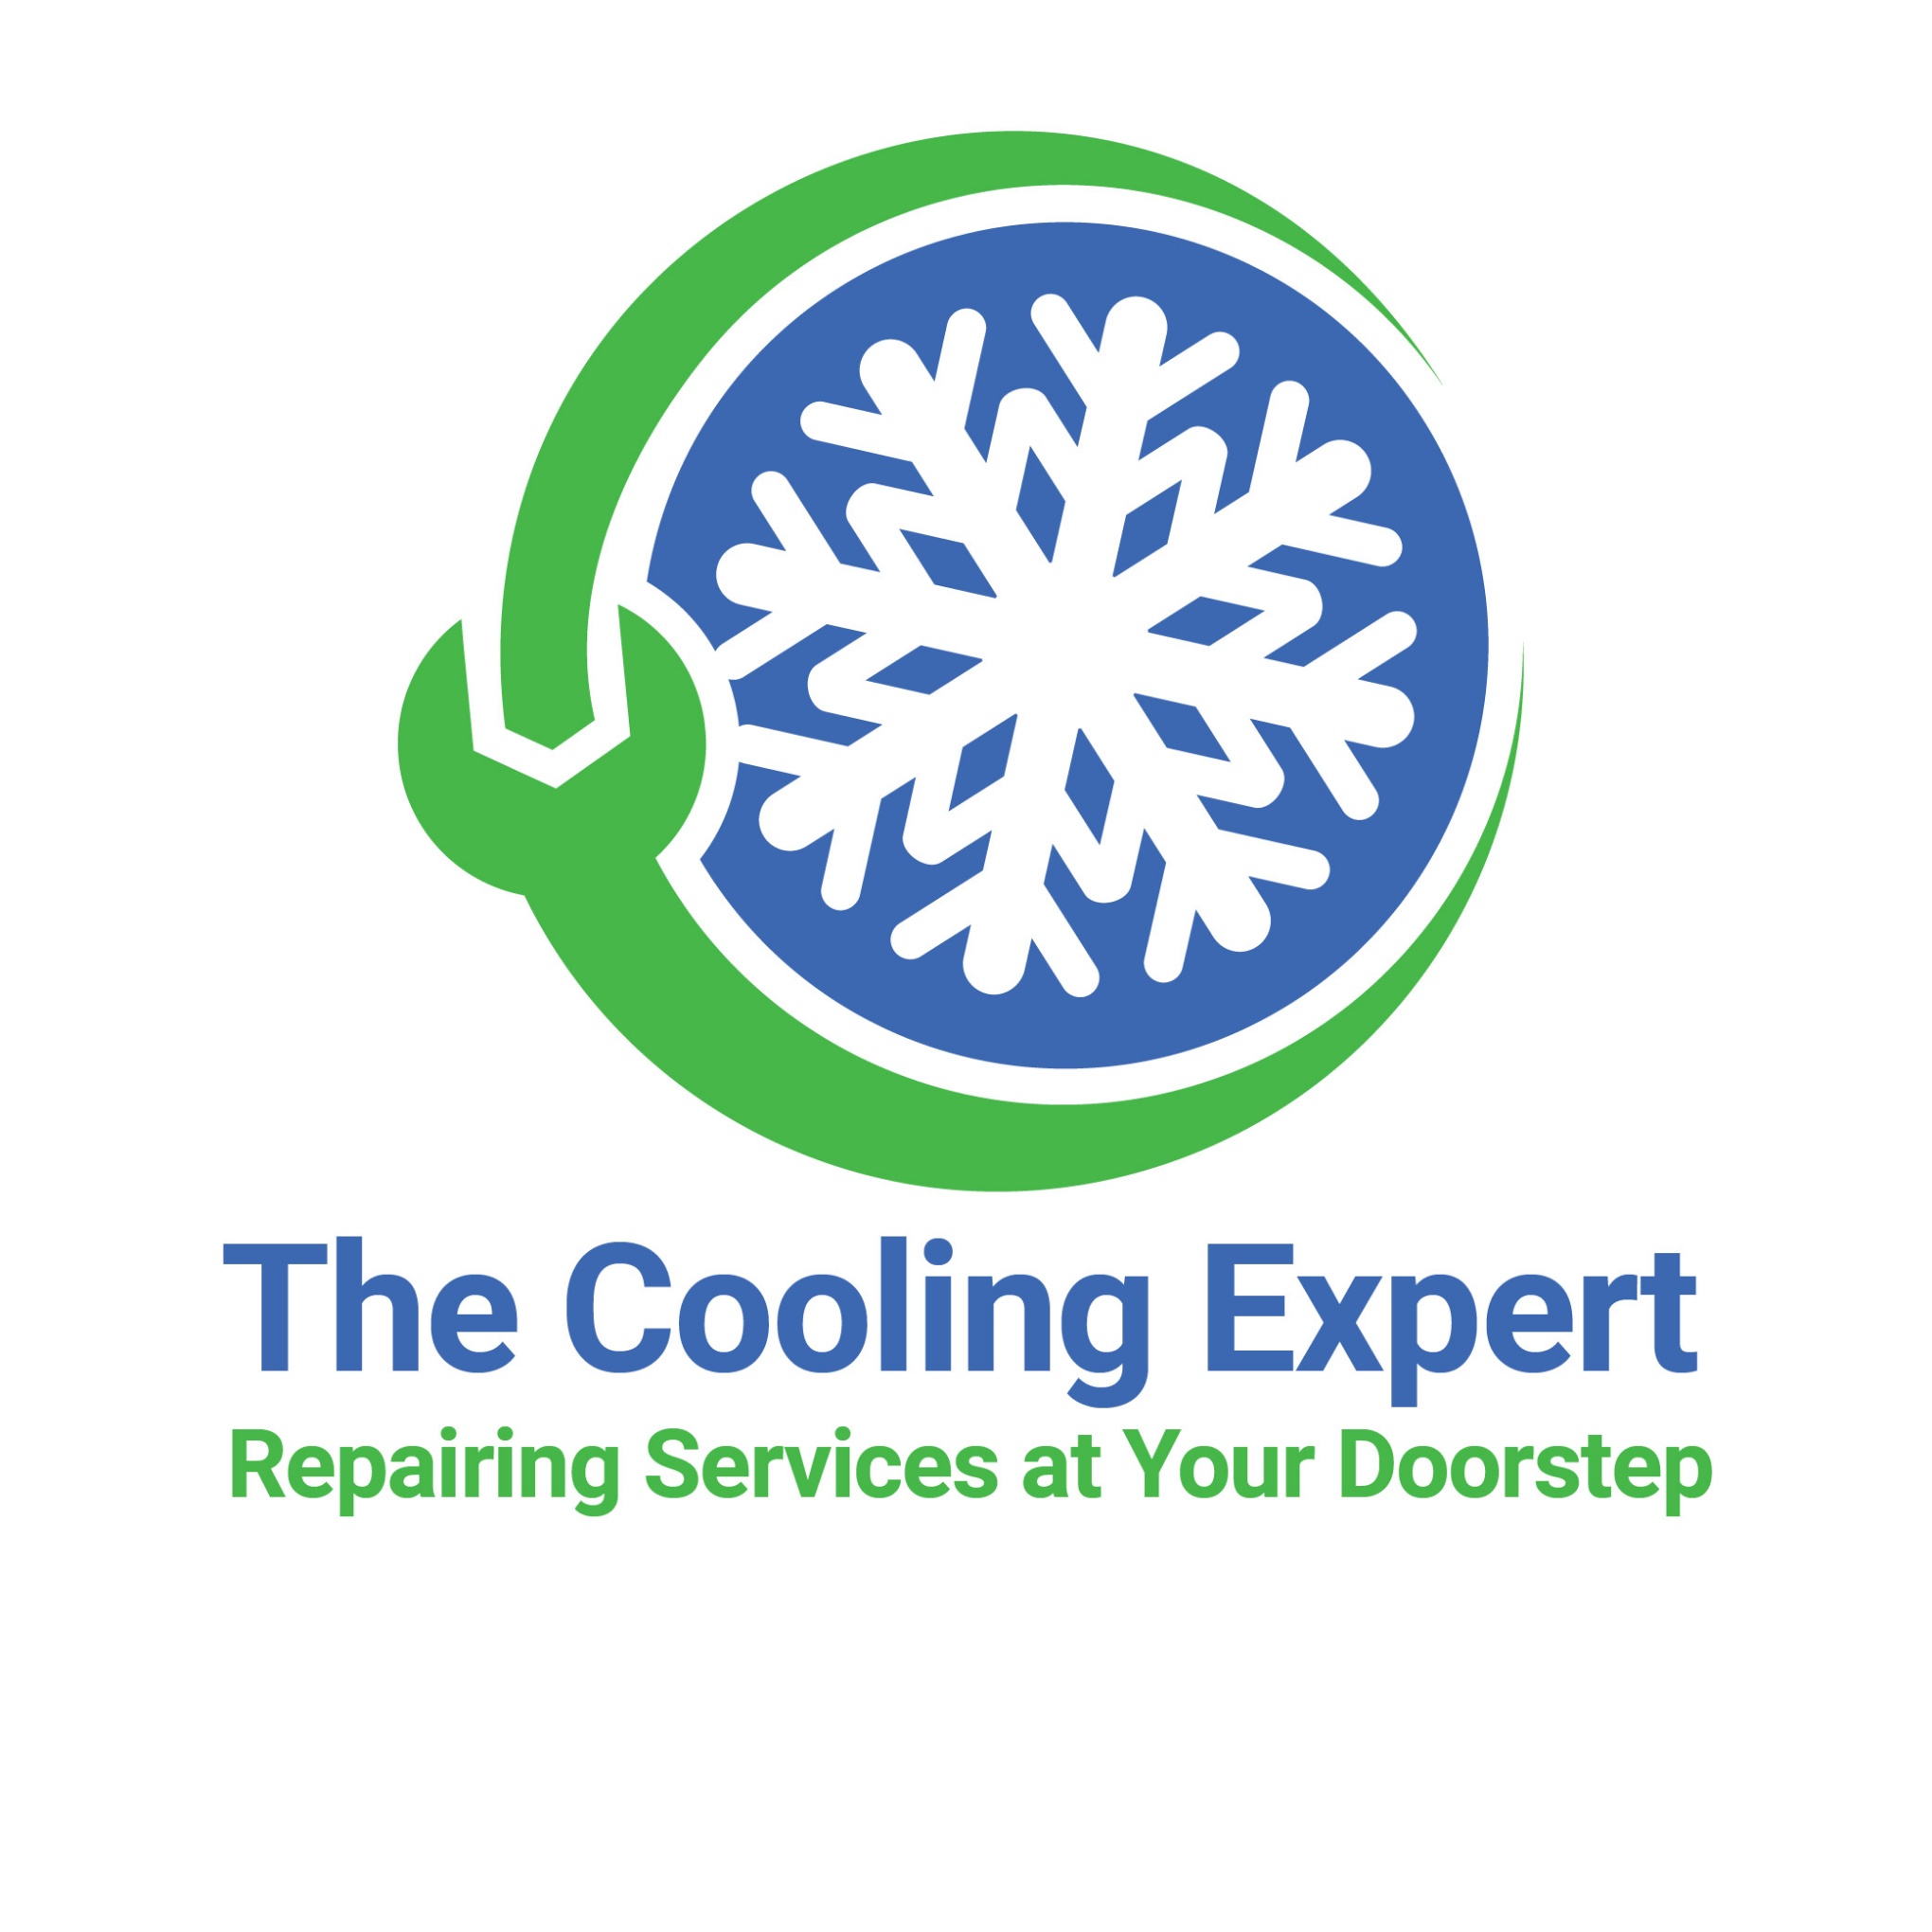 Refrigerator Repair, Air Condition Installation & Repair; Exp: Some experience (0-1 years)